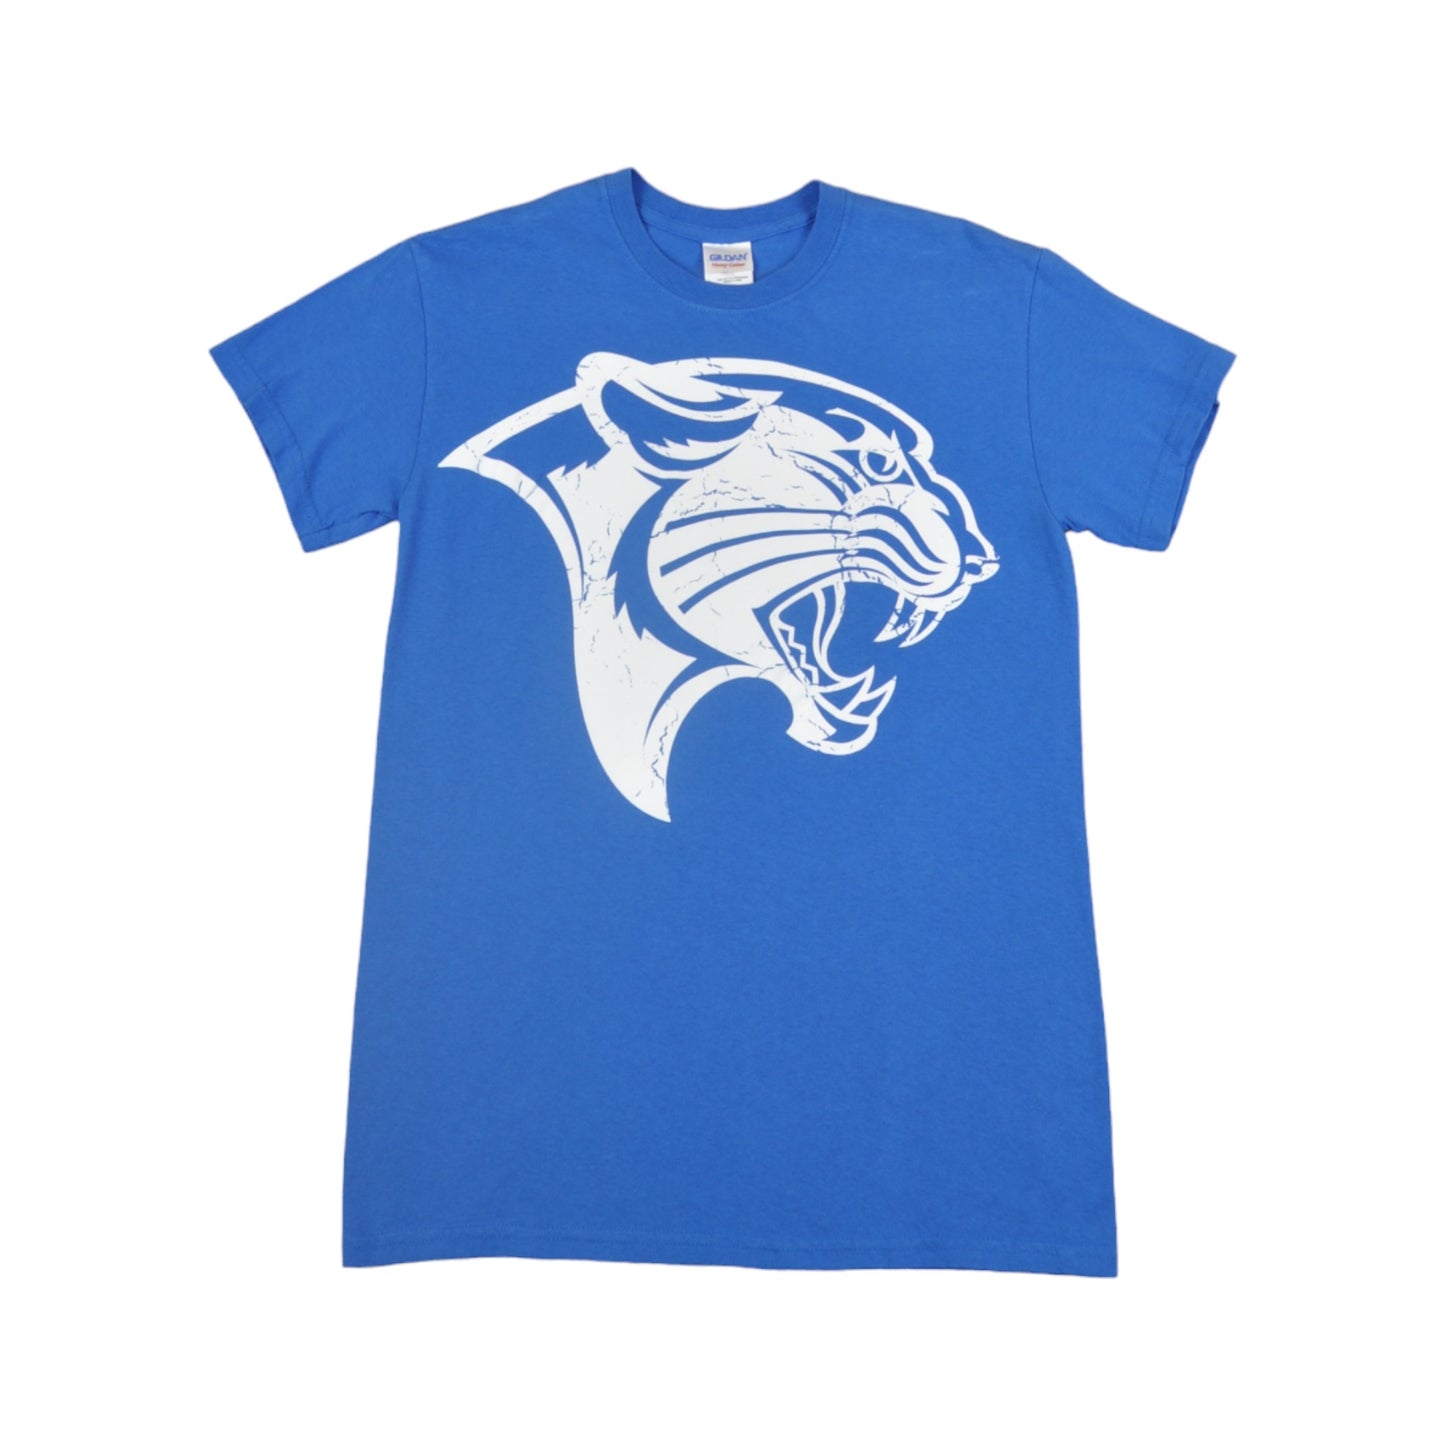 Vintage Panthers Homecoming T-shirt Blue Small